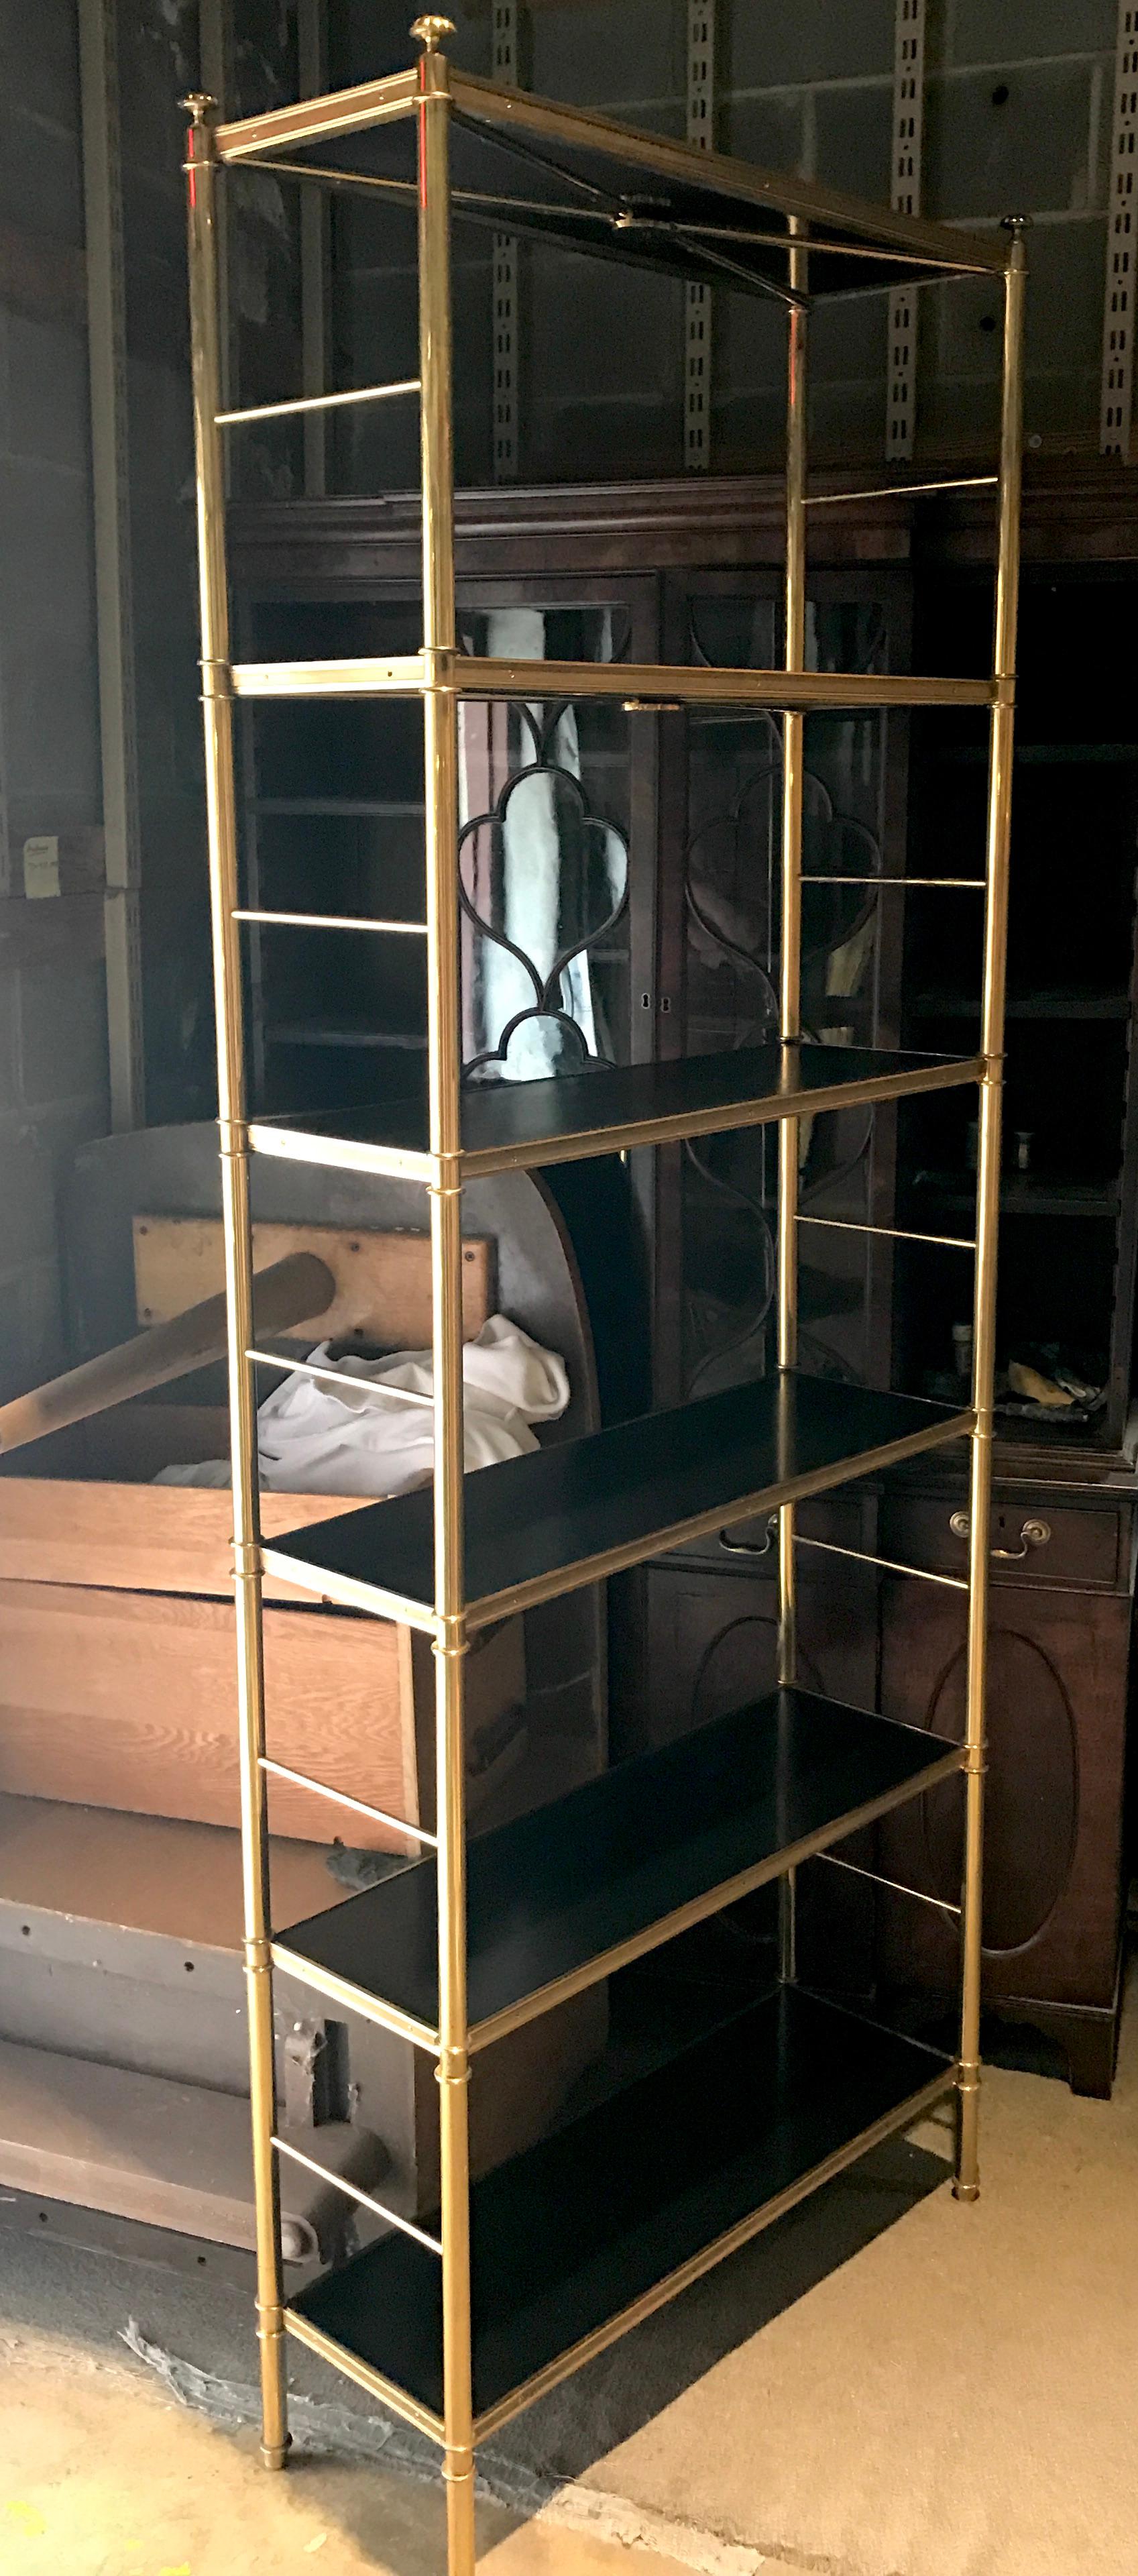 Tall elegant etagere or bookcase designed by Billy Baldwin for Cole Porter, designed by Frederick Victoria, Seven ebonized wood shelves rest in an engine turned brass frame. All adjustable and assembled. 


 